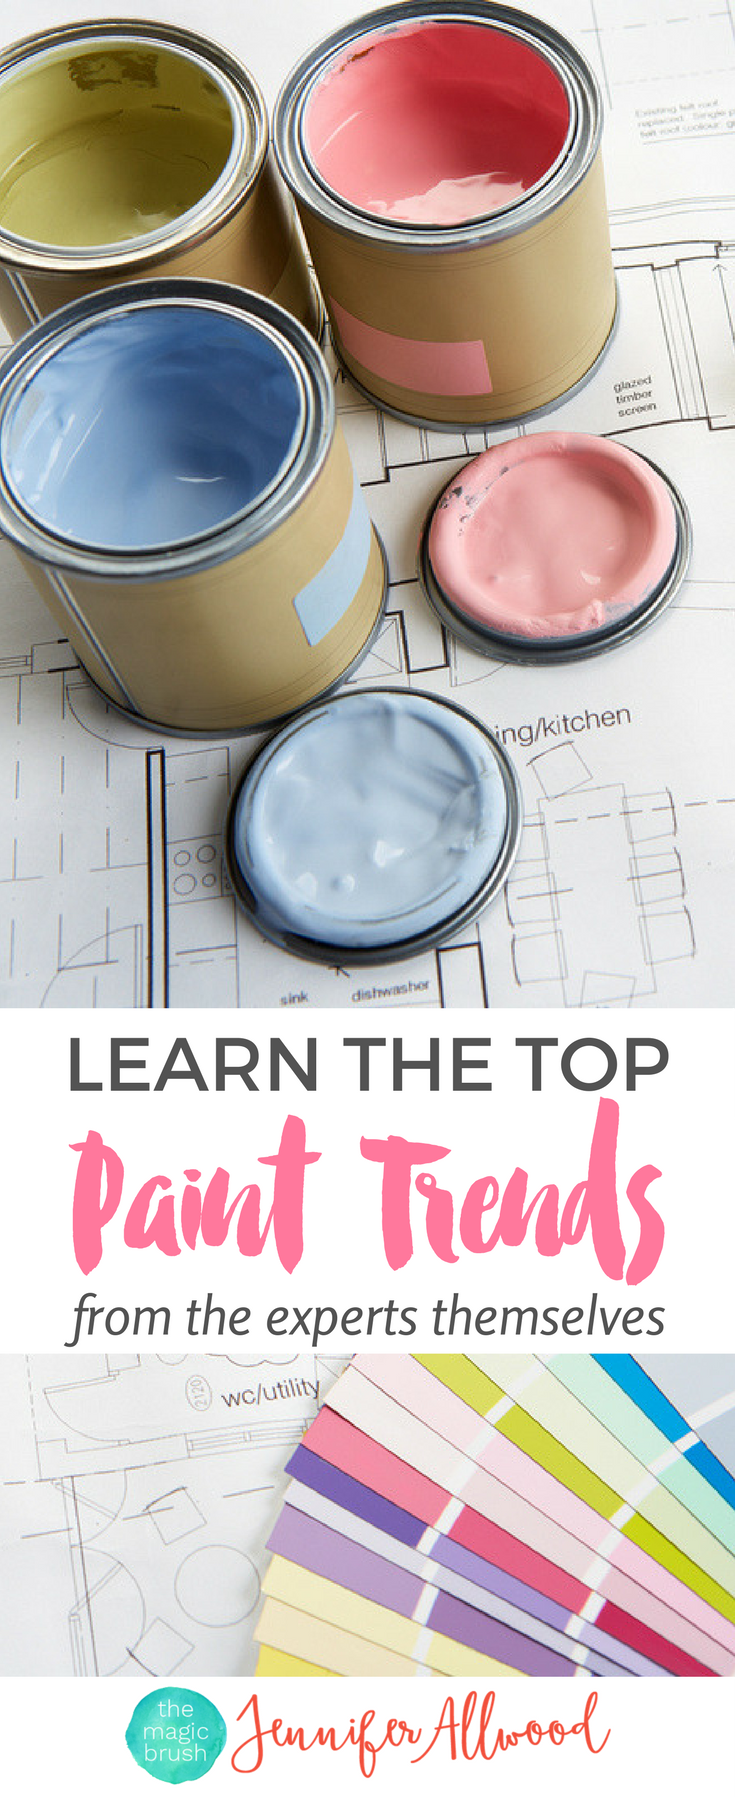 Learn the Paint Trends of 2018 from the leaders and experts in the painting industry | Jennifer Allwood | Best Paint Colors | Colors of the Year | Top Cabinet Colors | Top Wall Colors | Furniture Colors